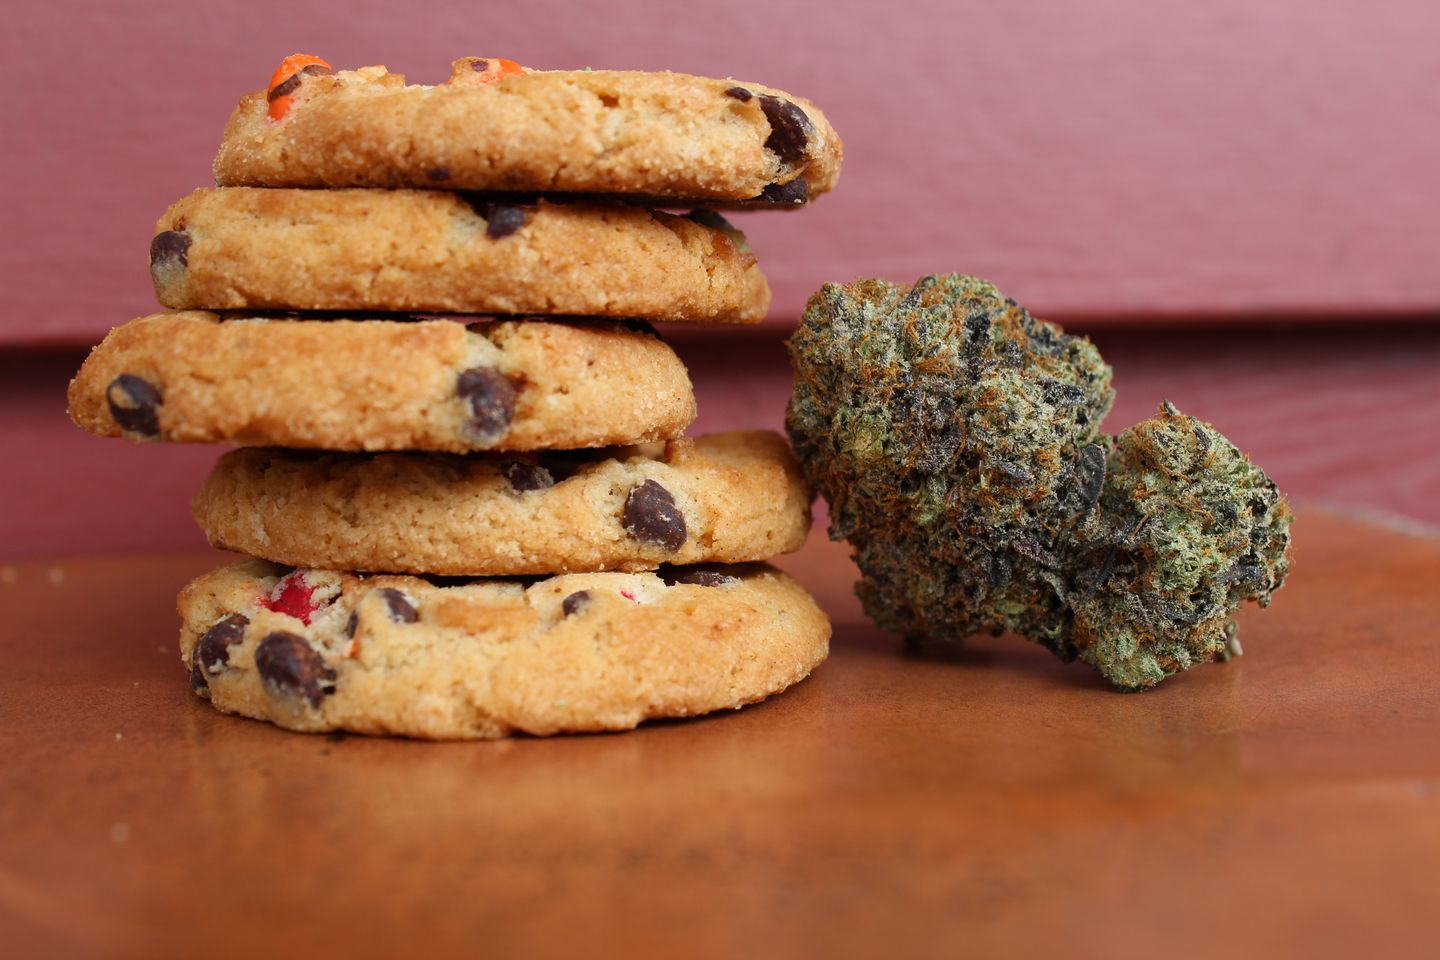 5 Things you should do with homemade edibles